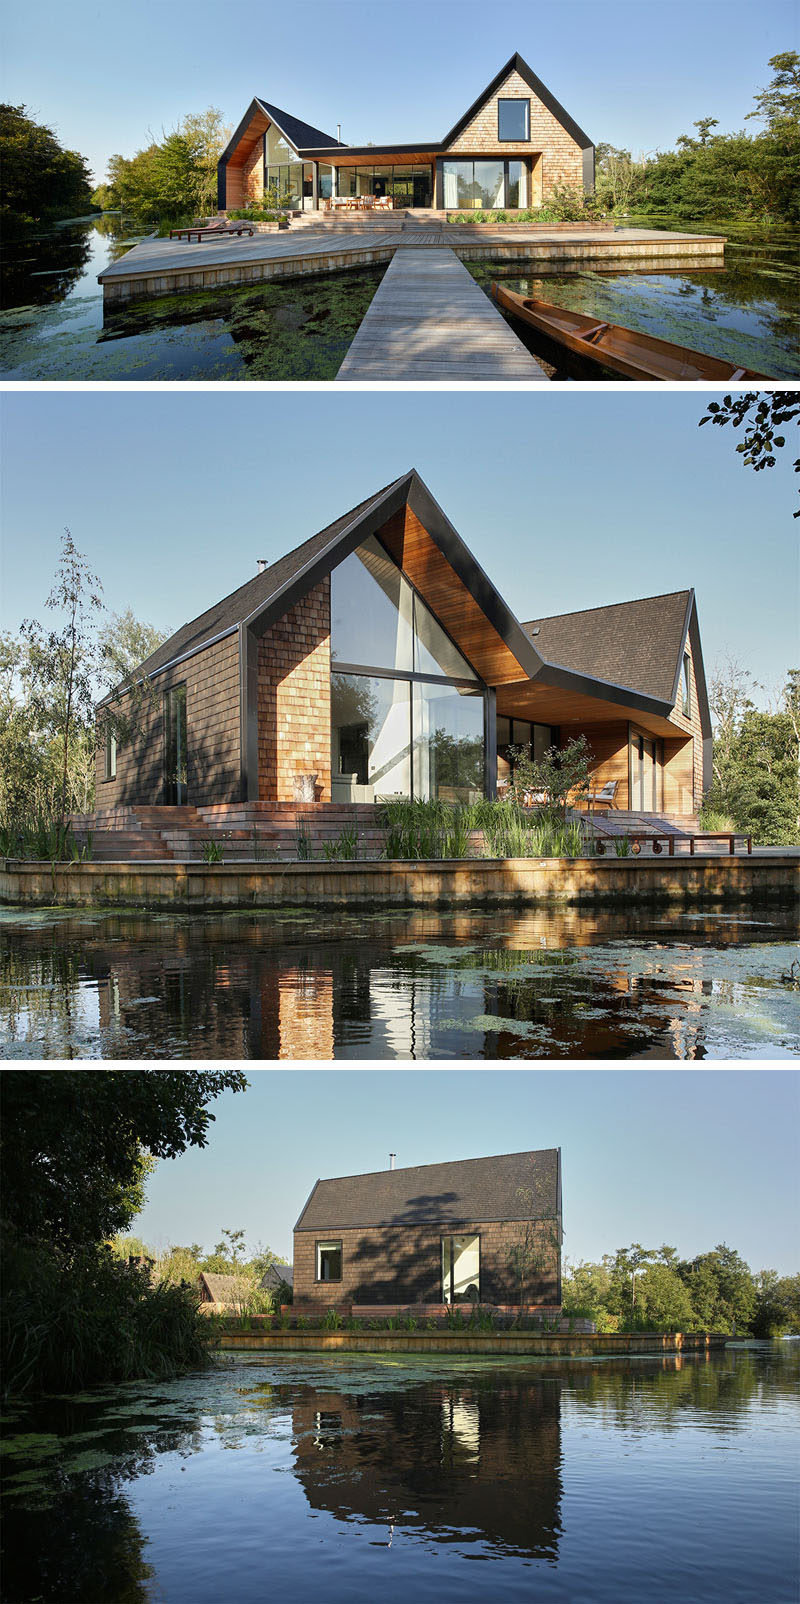 This new modern house covered in wood shingles has pitched roofs, a separate boat shed, sits beside a secluded lagoon and can also be rented out for vacation rentals.